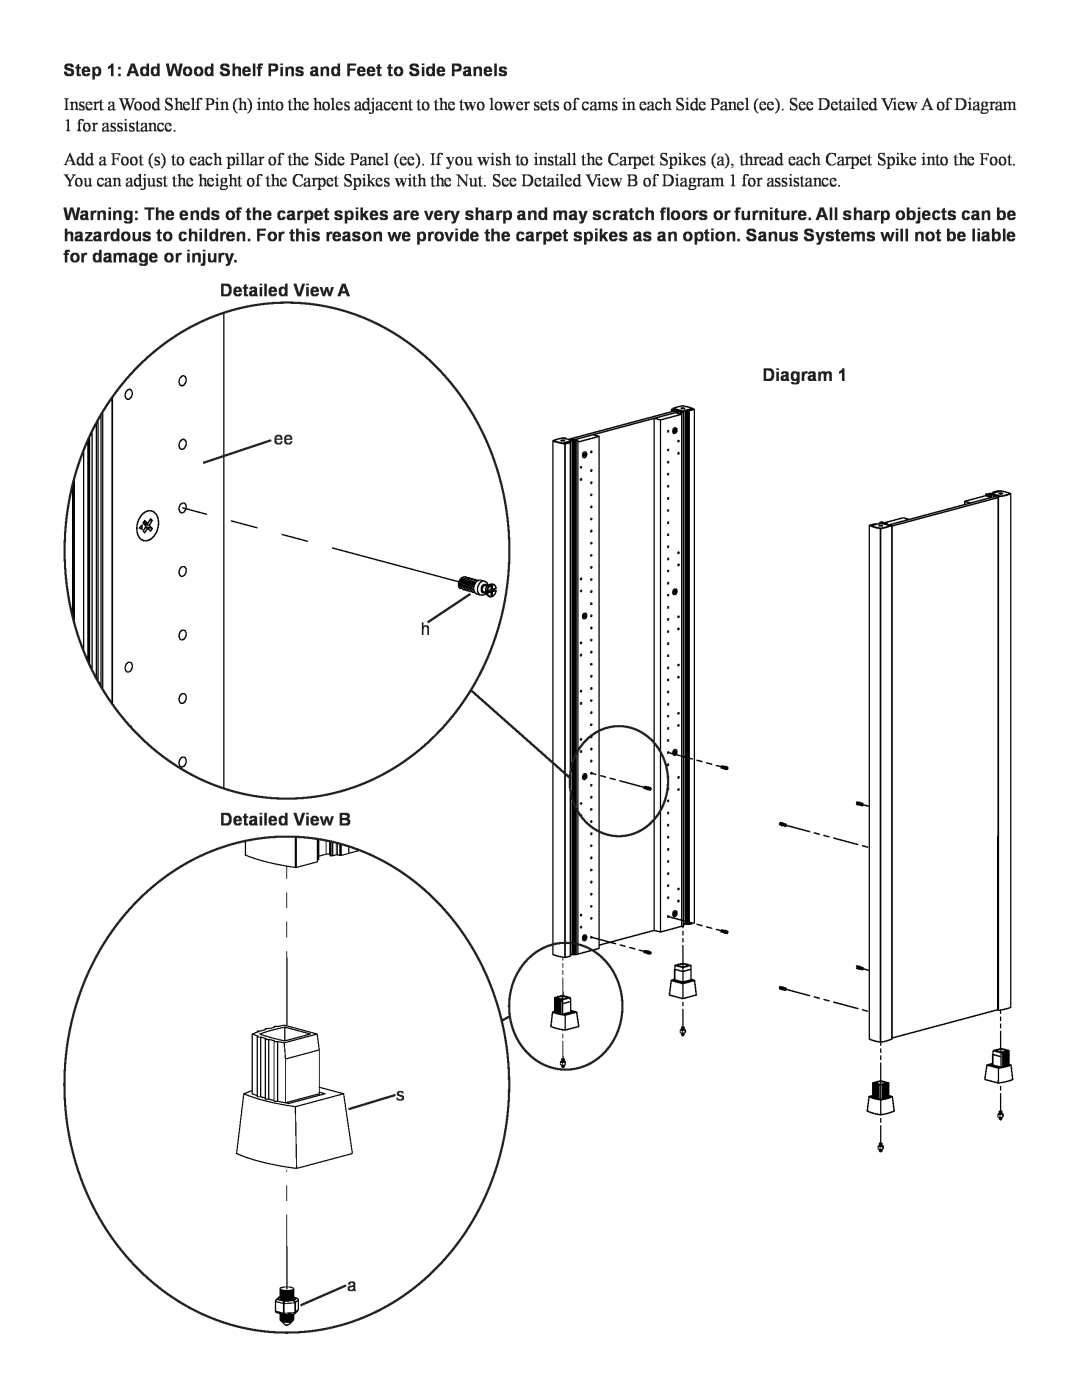 Sanus Systems CFAR47 manual Add Wood Shelf Pins and Feet to Side Panels, Detailed View A Diagram, Detailed View B 